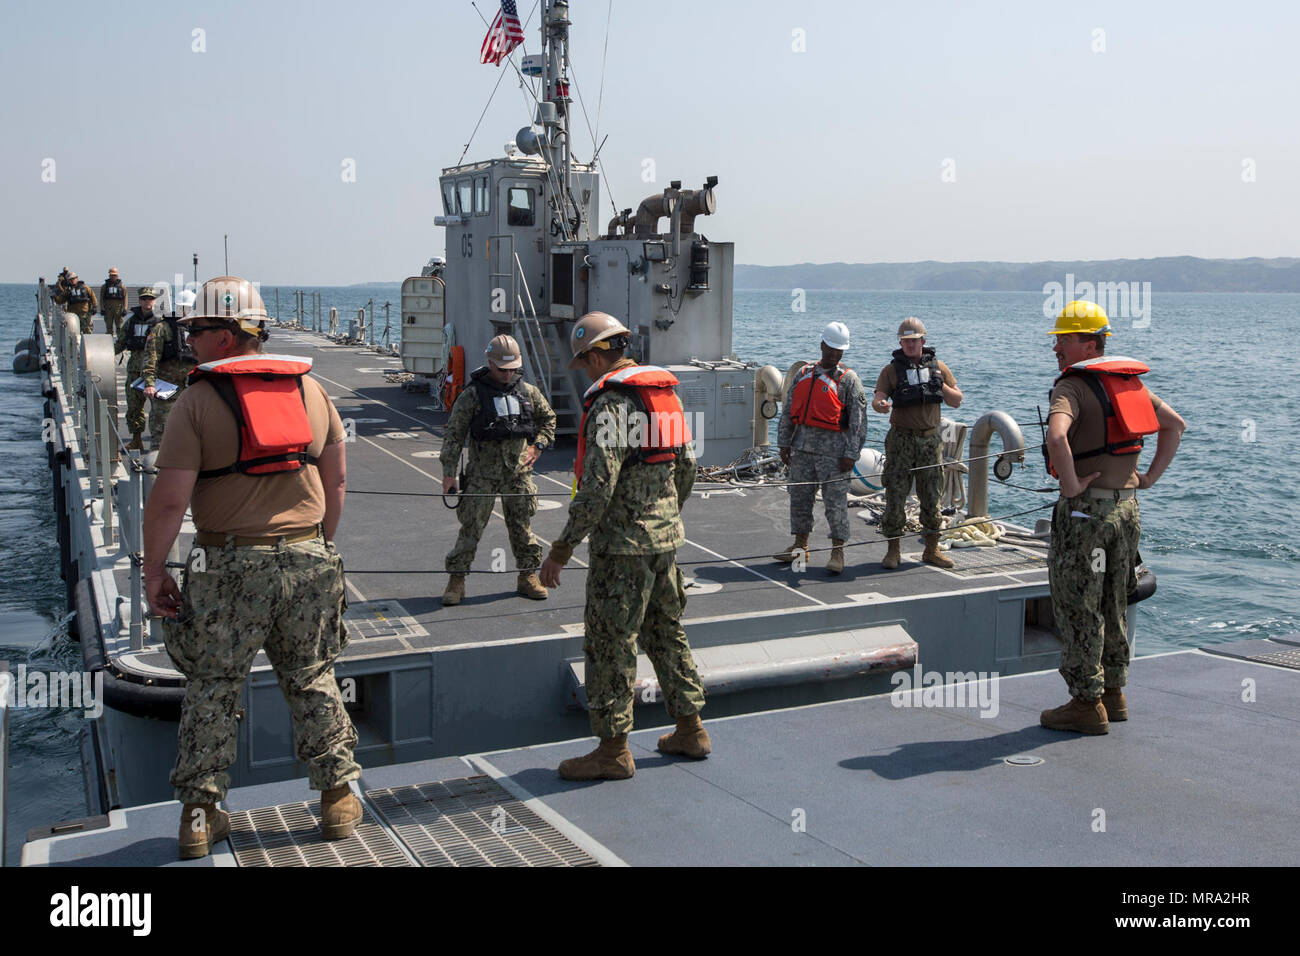 U.S. Marines, Sailors, and Coast Guardsmen aboard the USNS Pililaau conduct loading and off loading of cargo and gear during Combined Joint Logistics Over The Shore (CJ LOTS) Exercise in the Republic of Korea (ROK) in the Sea of Japan, Pohang, Korea, April 13, 2017. CJ LOTS is an exercise designed to train U.S. and ROK service members to accomplish vital logistical measures in a strategic area while strengthening communication and cooperation between the U.S. and ROK alliance. Stock Photo